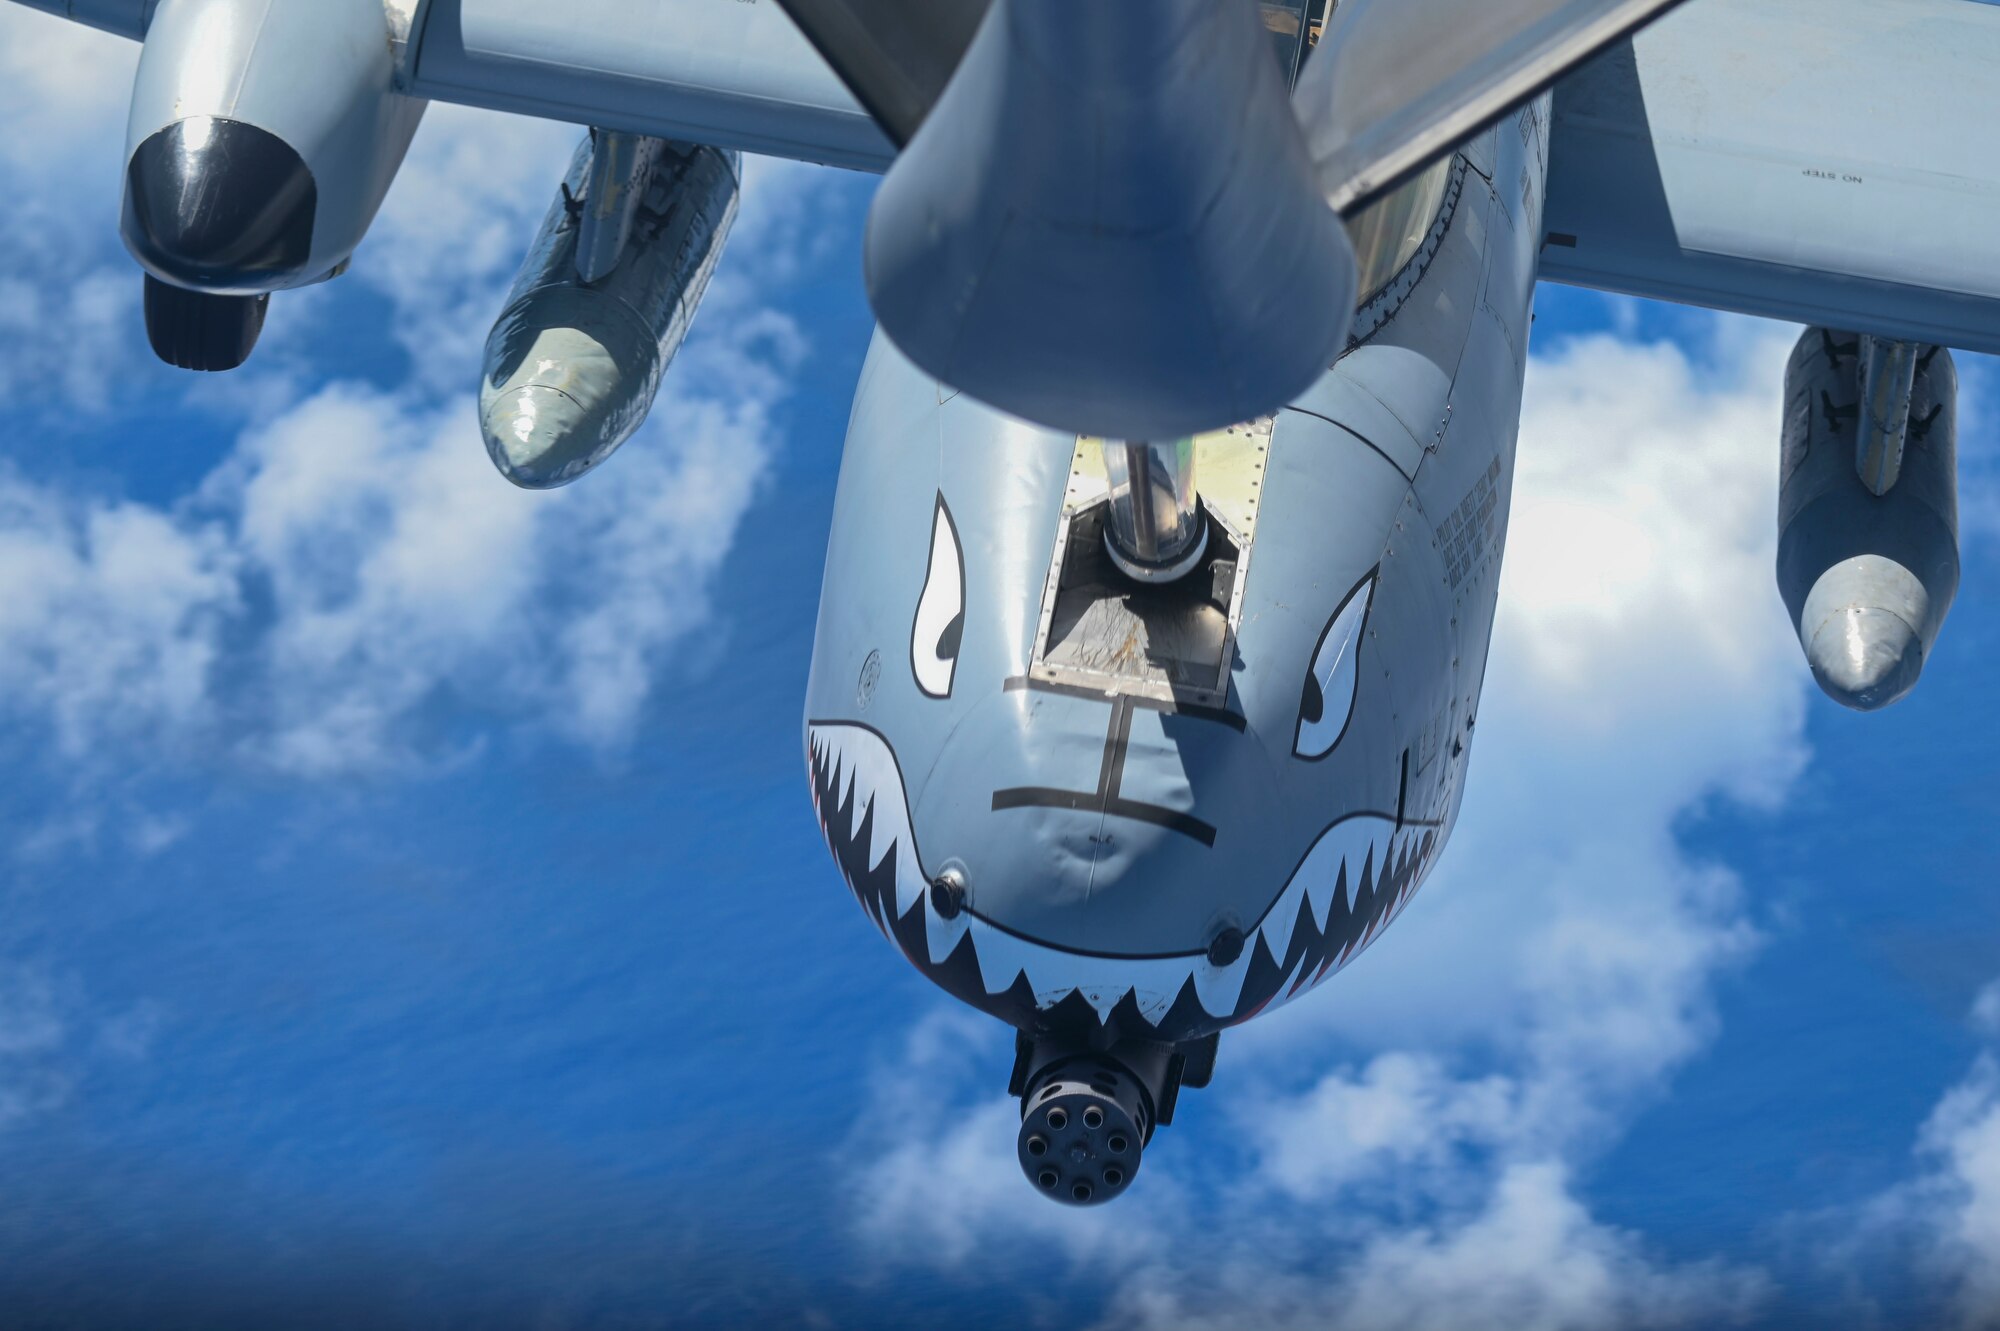 A plane aerial refueling